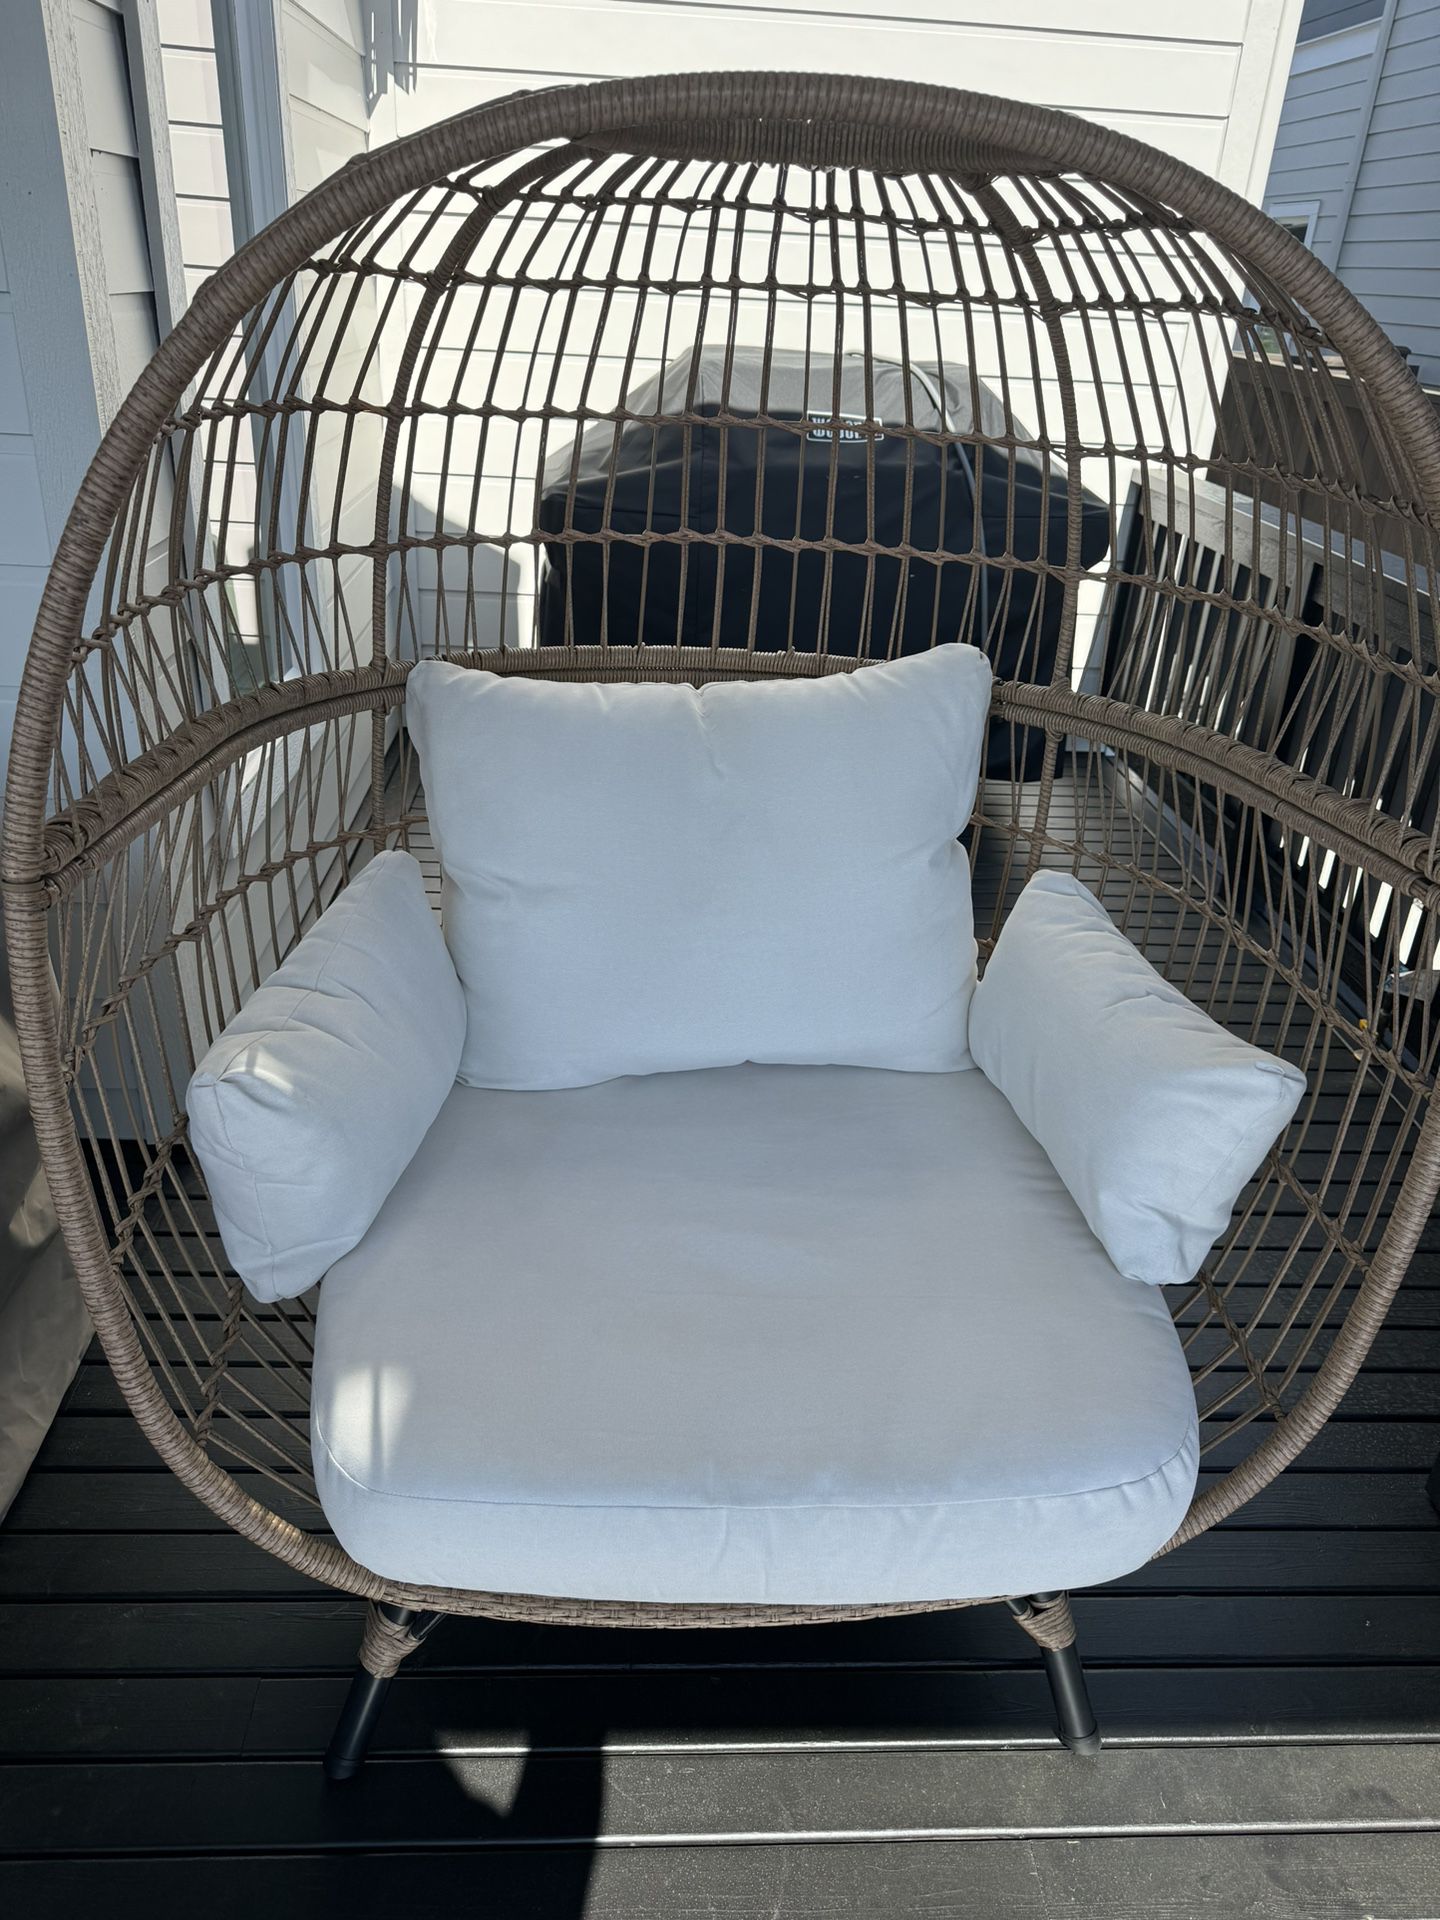 Threshold - Patio Egg chair (w/cover)